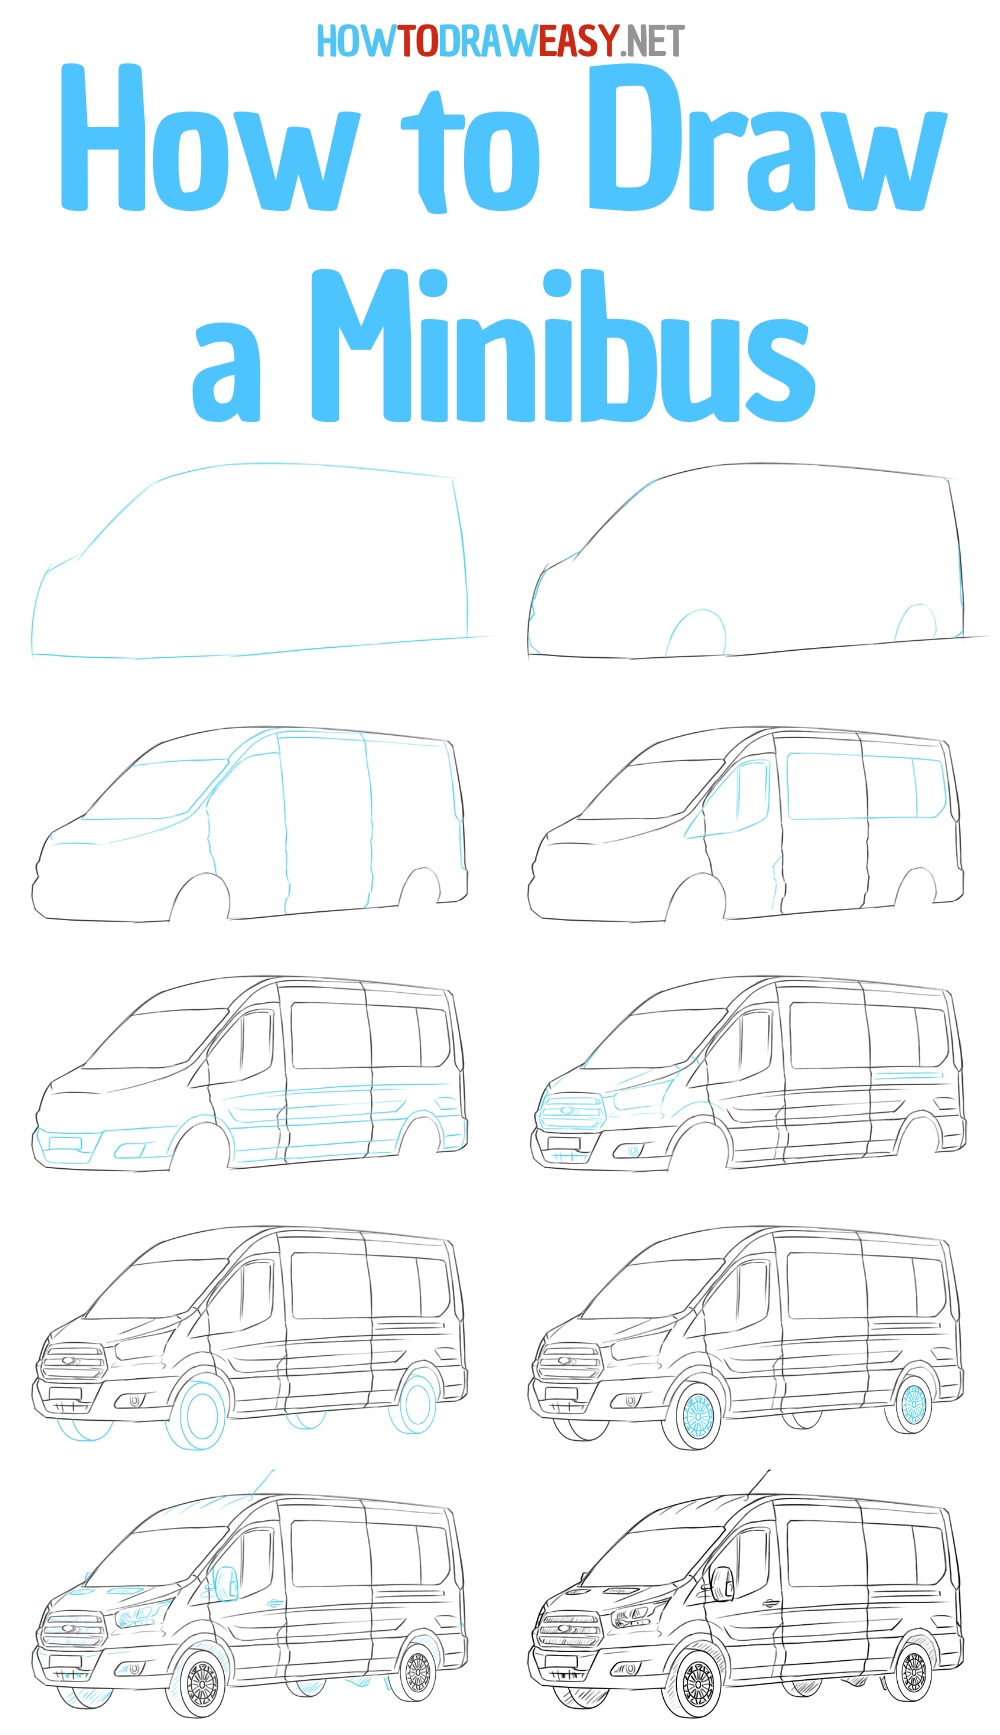 How to Draw a Minibus Step by Step